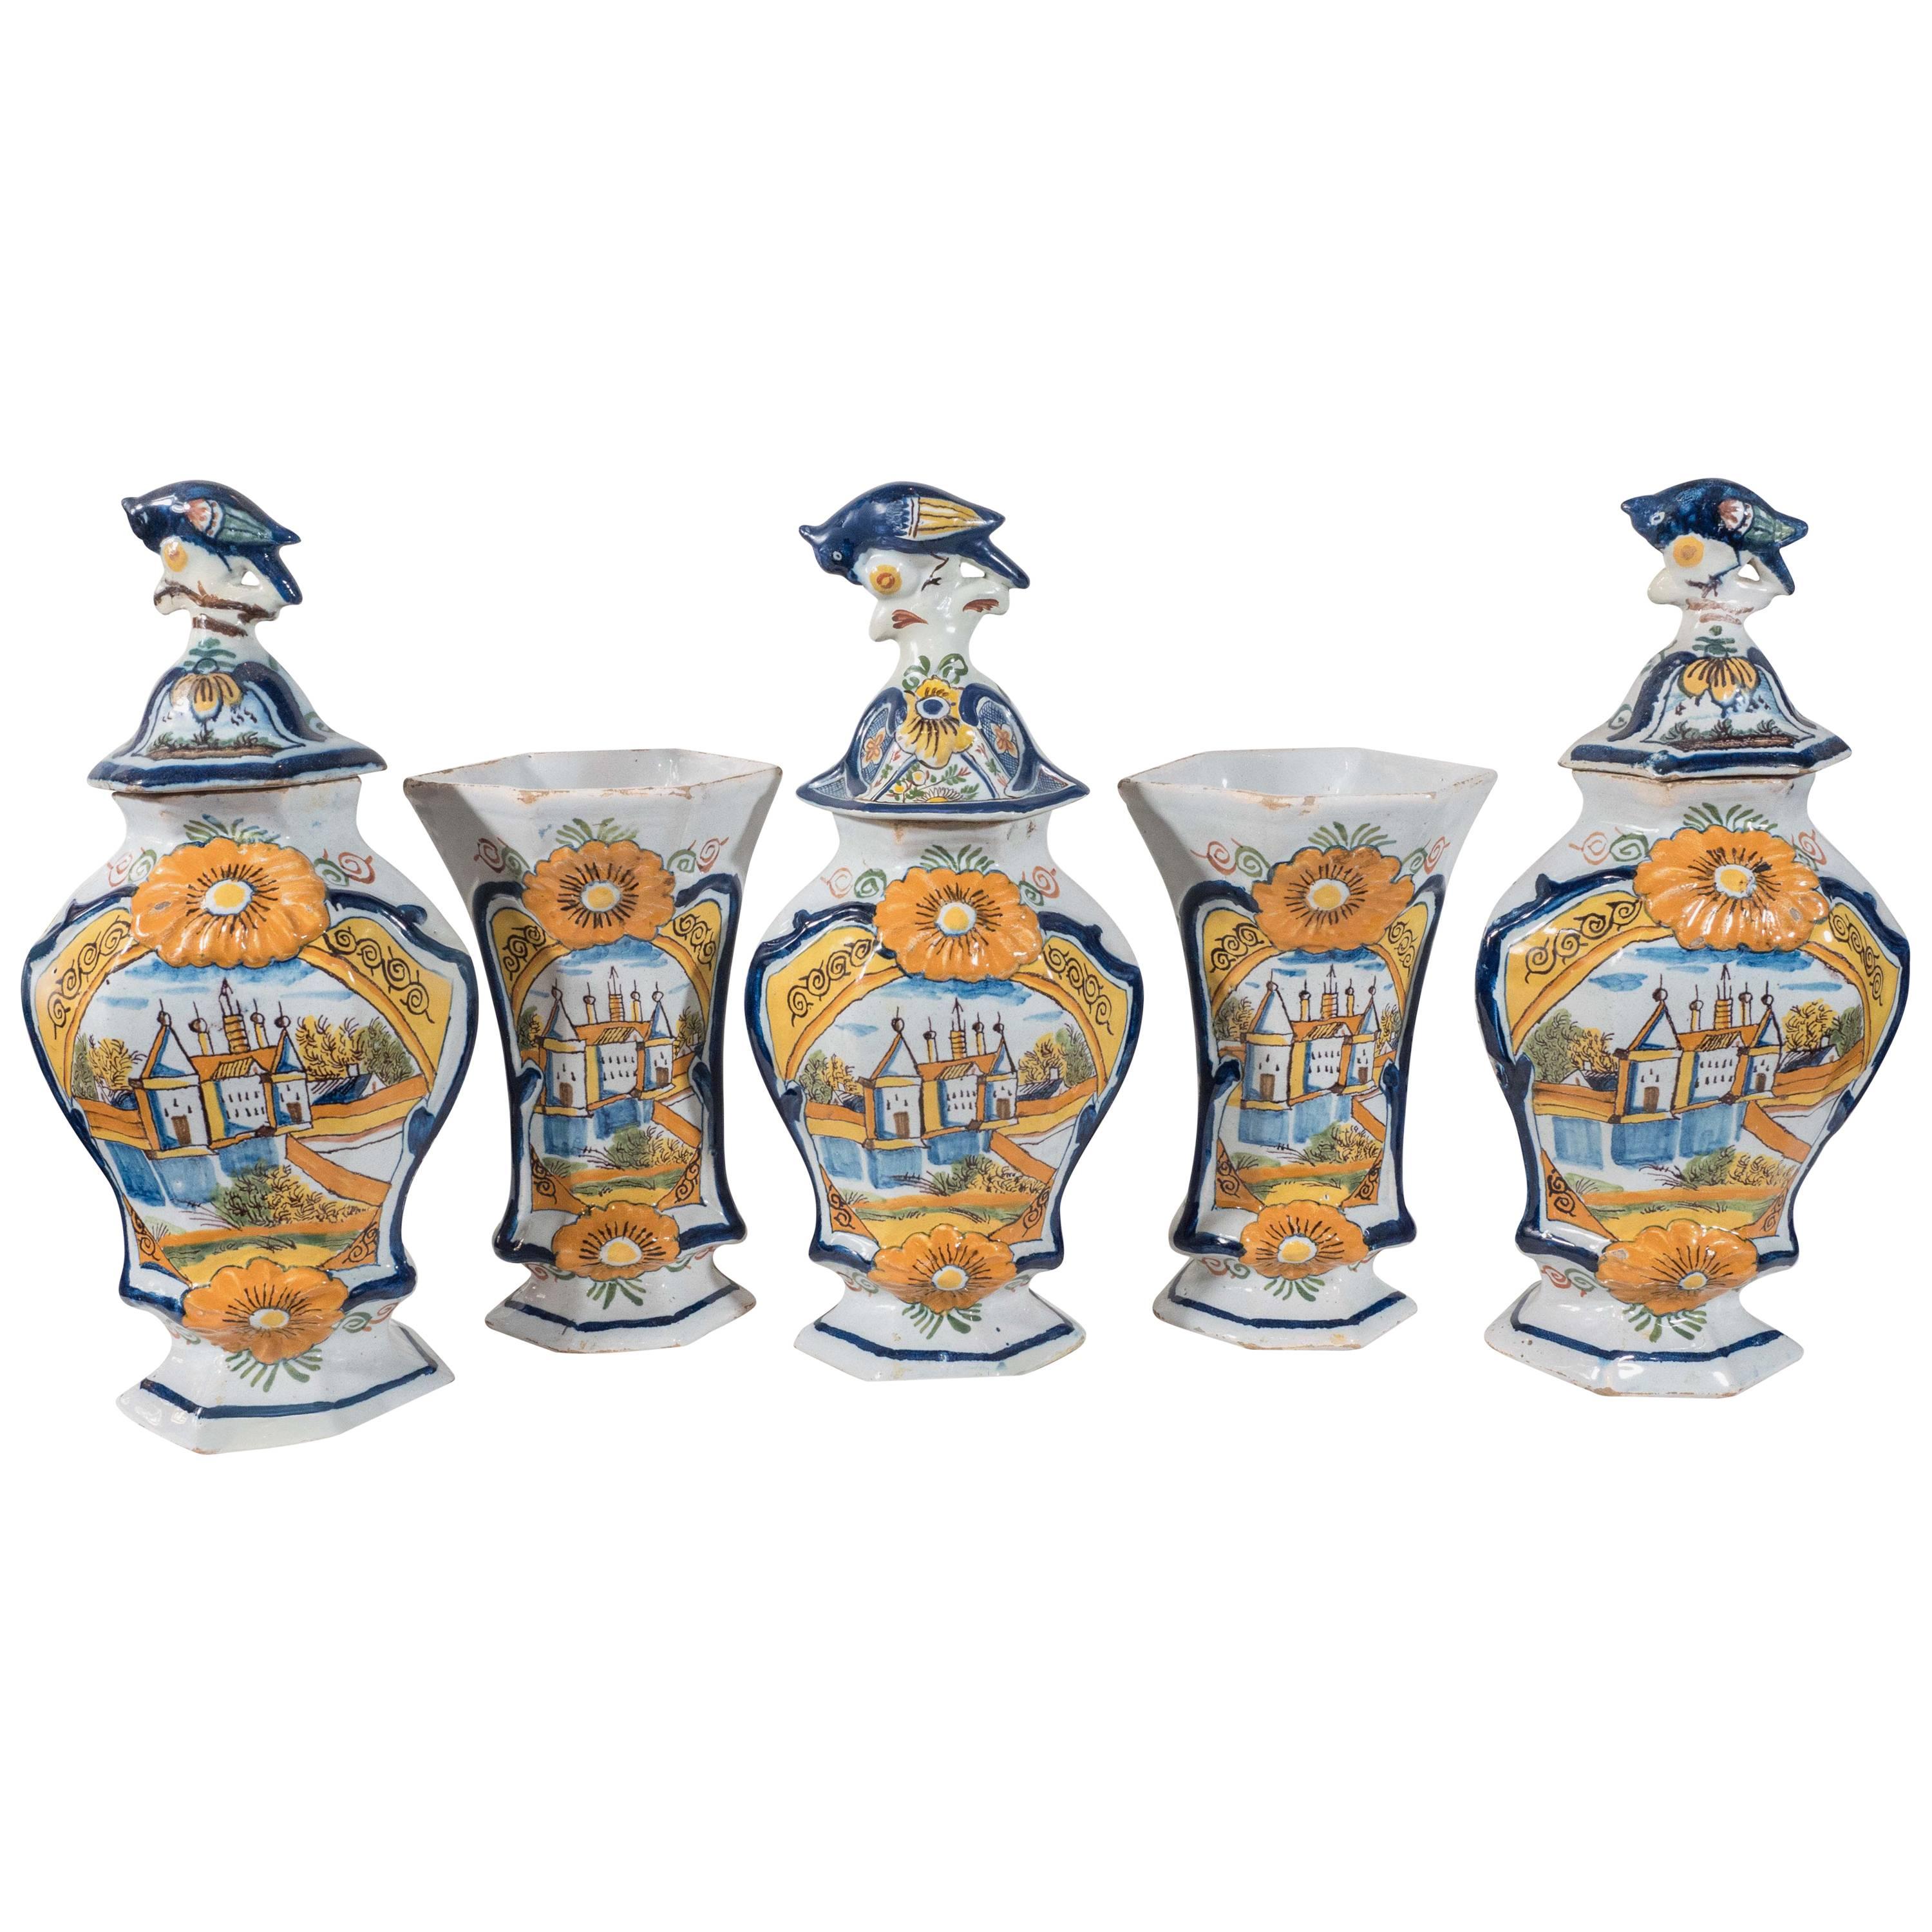  Garniture of Five Delft Vases Painted in Colorful Polychrome IN STOCK